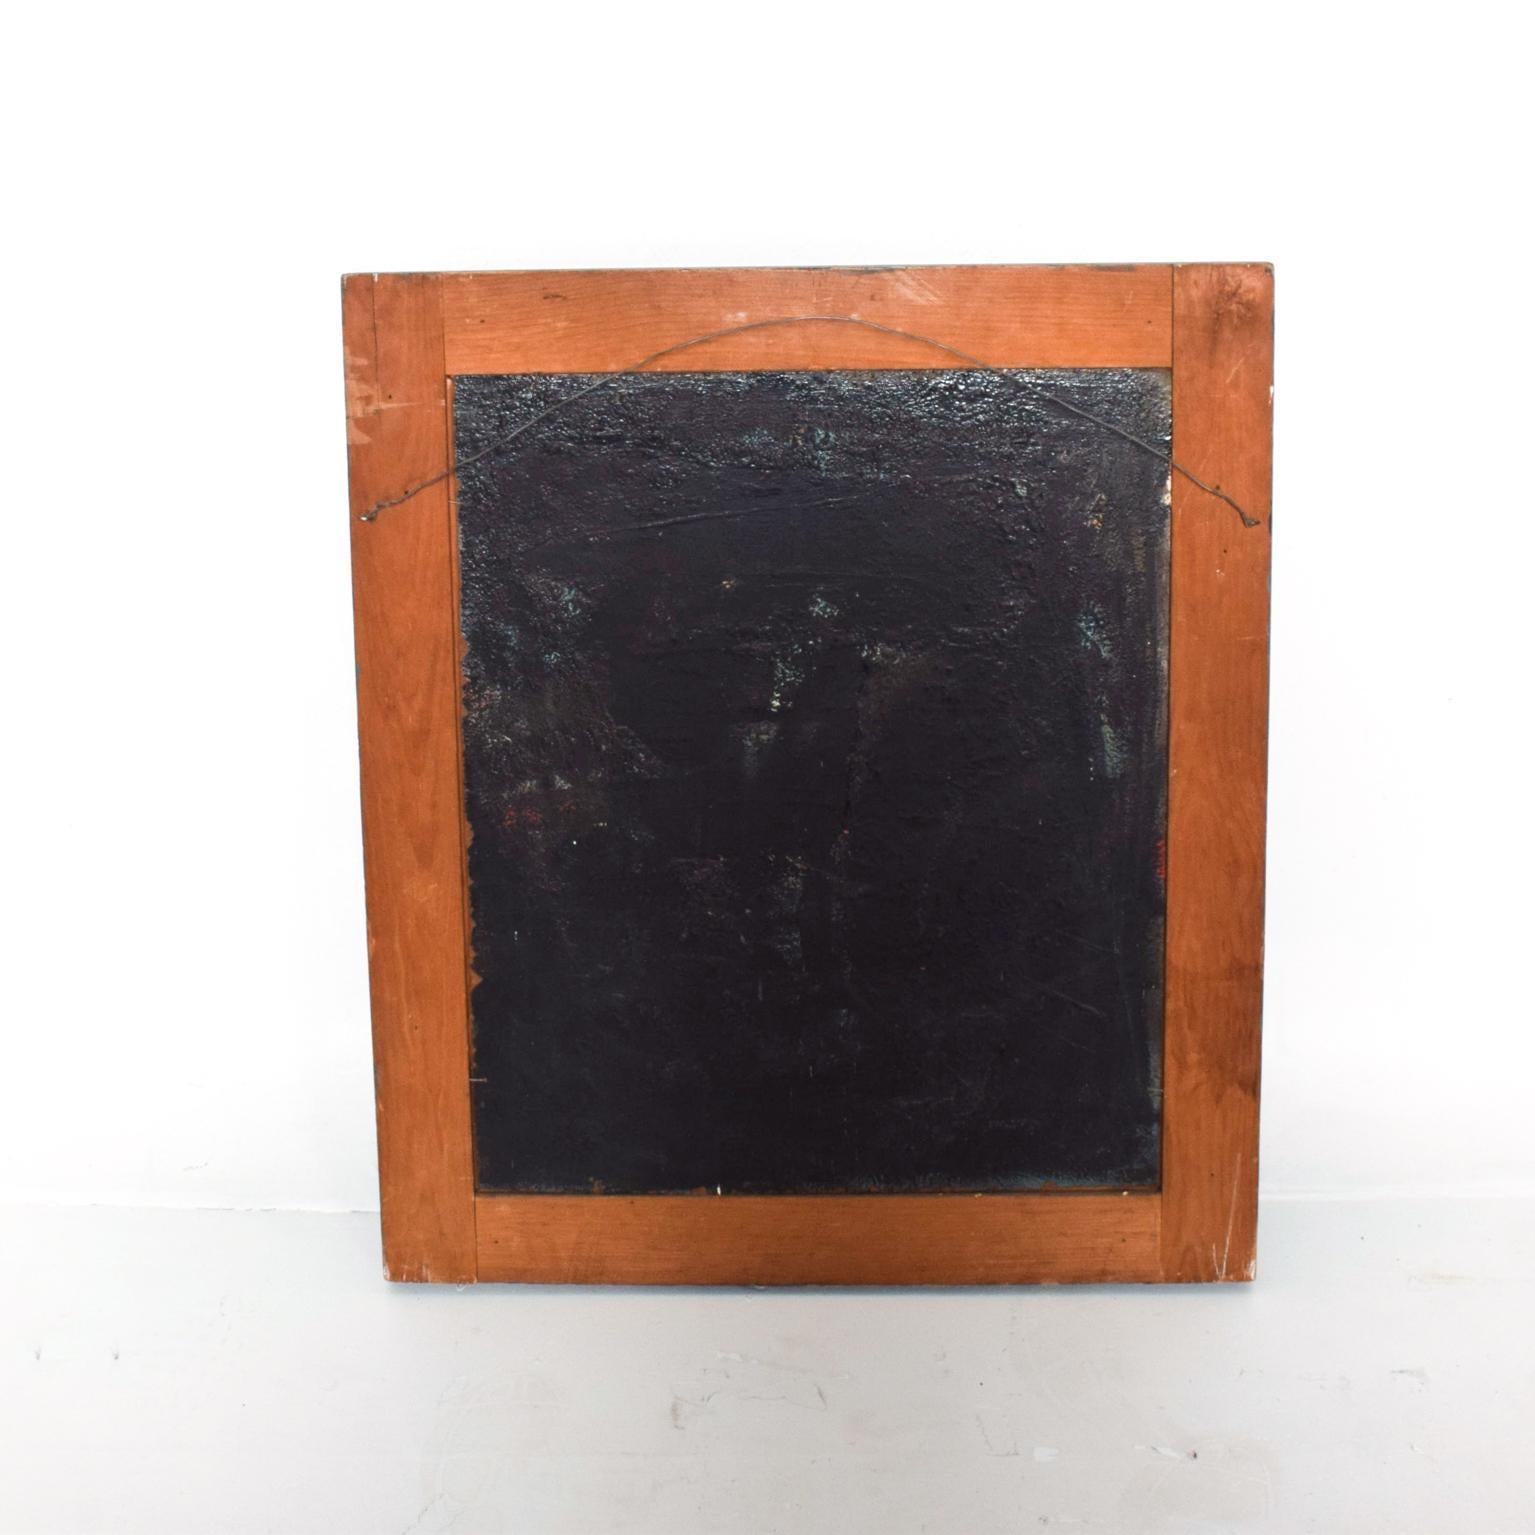 We are pleased to offer for your consideration a beautiful a unique oil on Masonite board signed Worthington.
Beautiful colors. Unique abstract composition. Original patinated wood frame.
Dimensions: 25 1/2